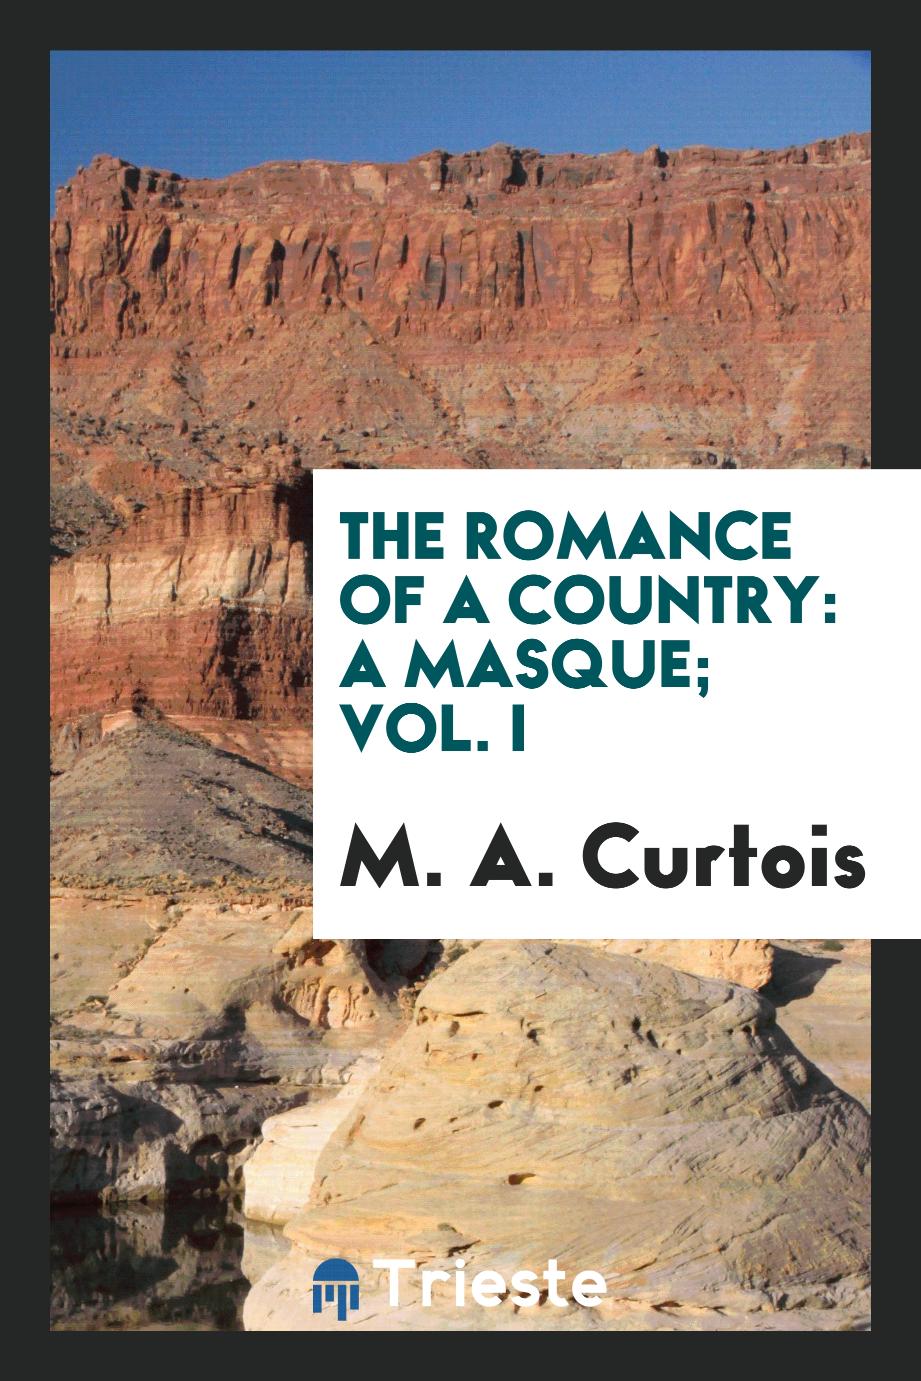 The romance of a country: A masque; Vol. I